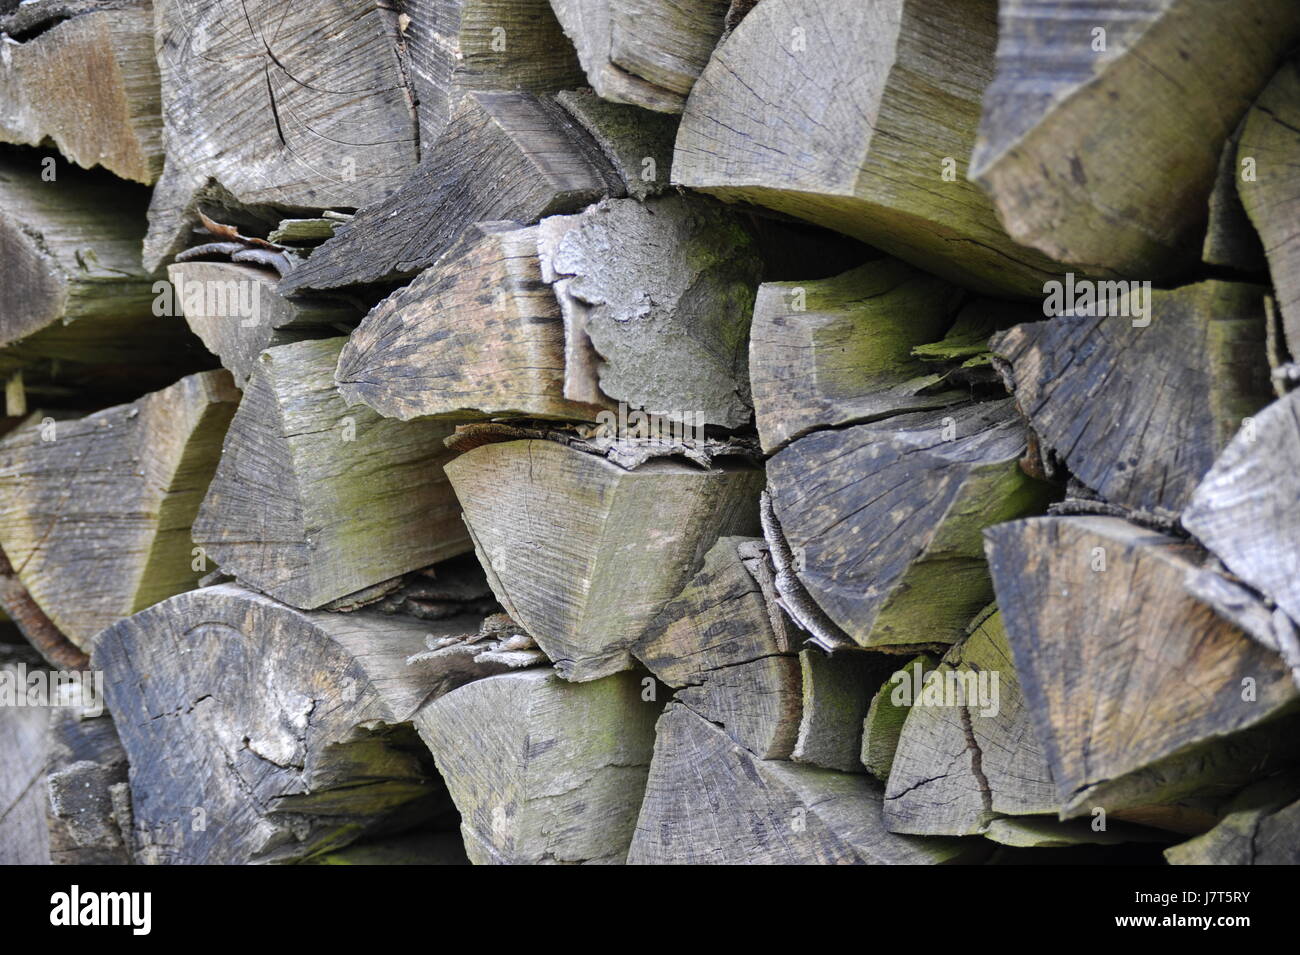 wood raw material firewood stratified stock provision tree trees wood trunk Stock Photo